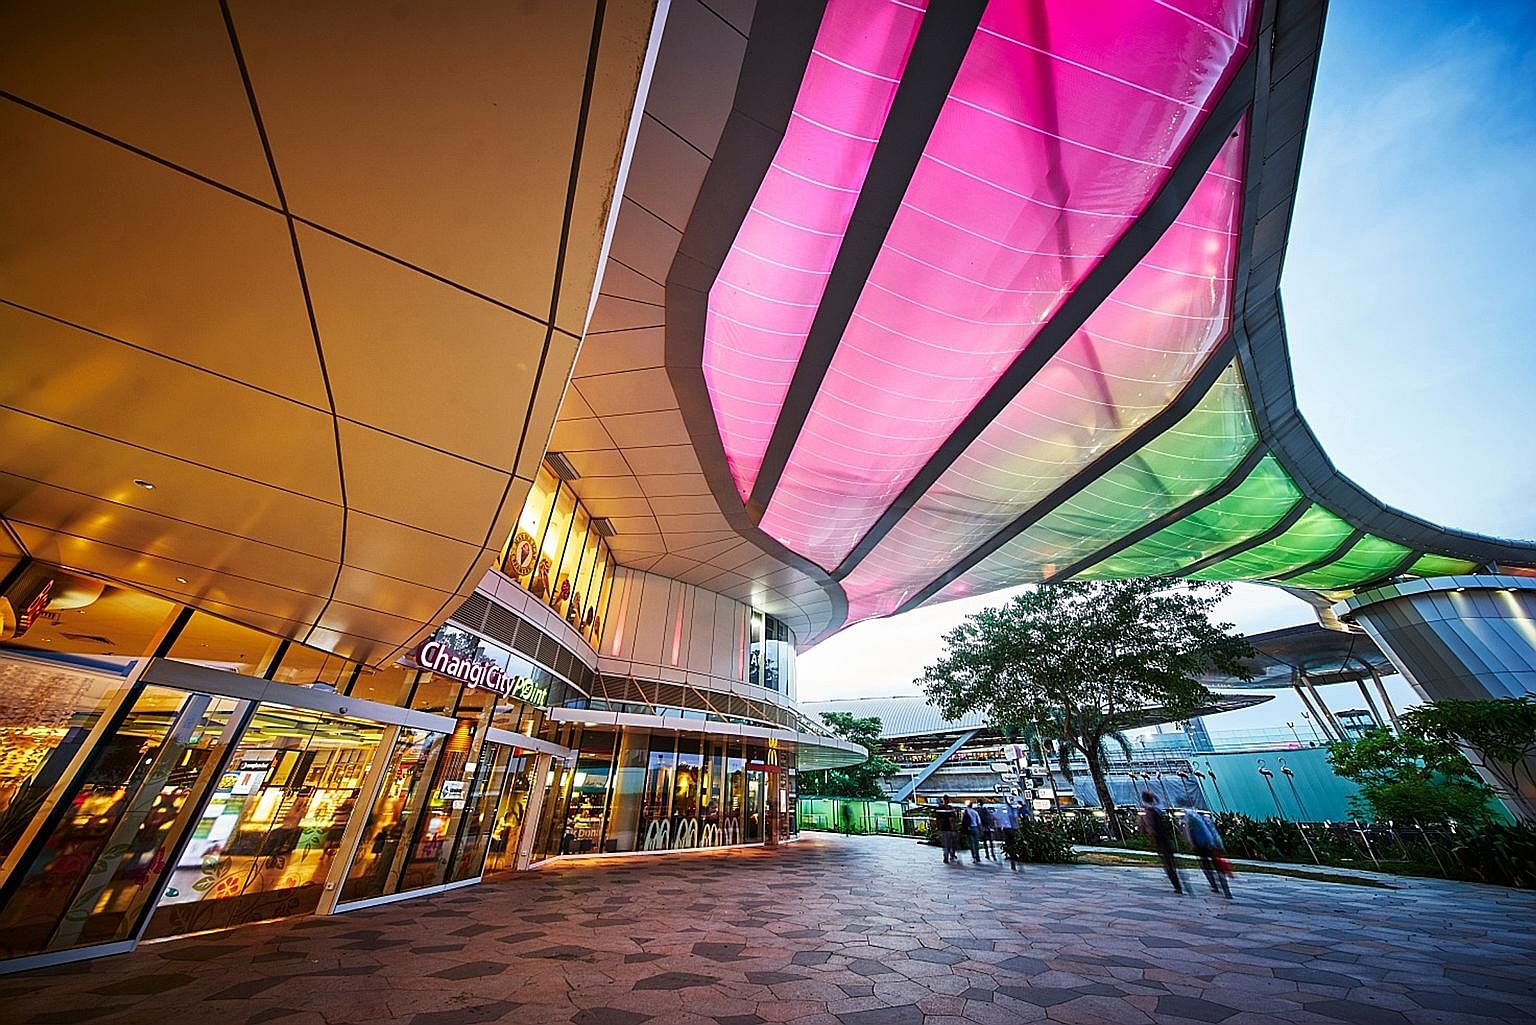 Broadly speaking, Singapore Exchange-listed real estate investment trusts (S-Reits) operate in four major sectors - retail, hospitality, industrial/ logistics and office. S-Reits have yielded anywhere between 6 per cent and 9 per cent over the past t